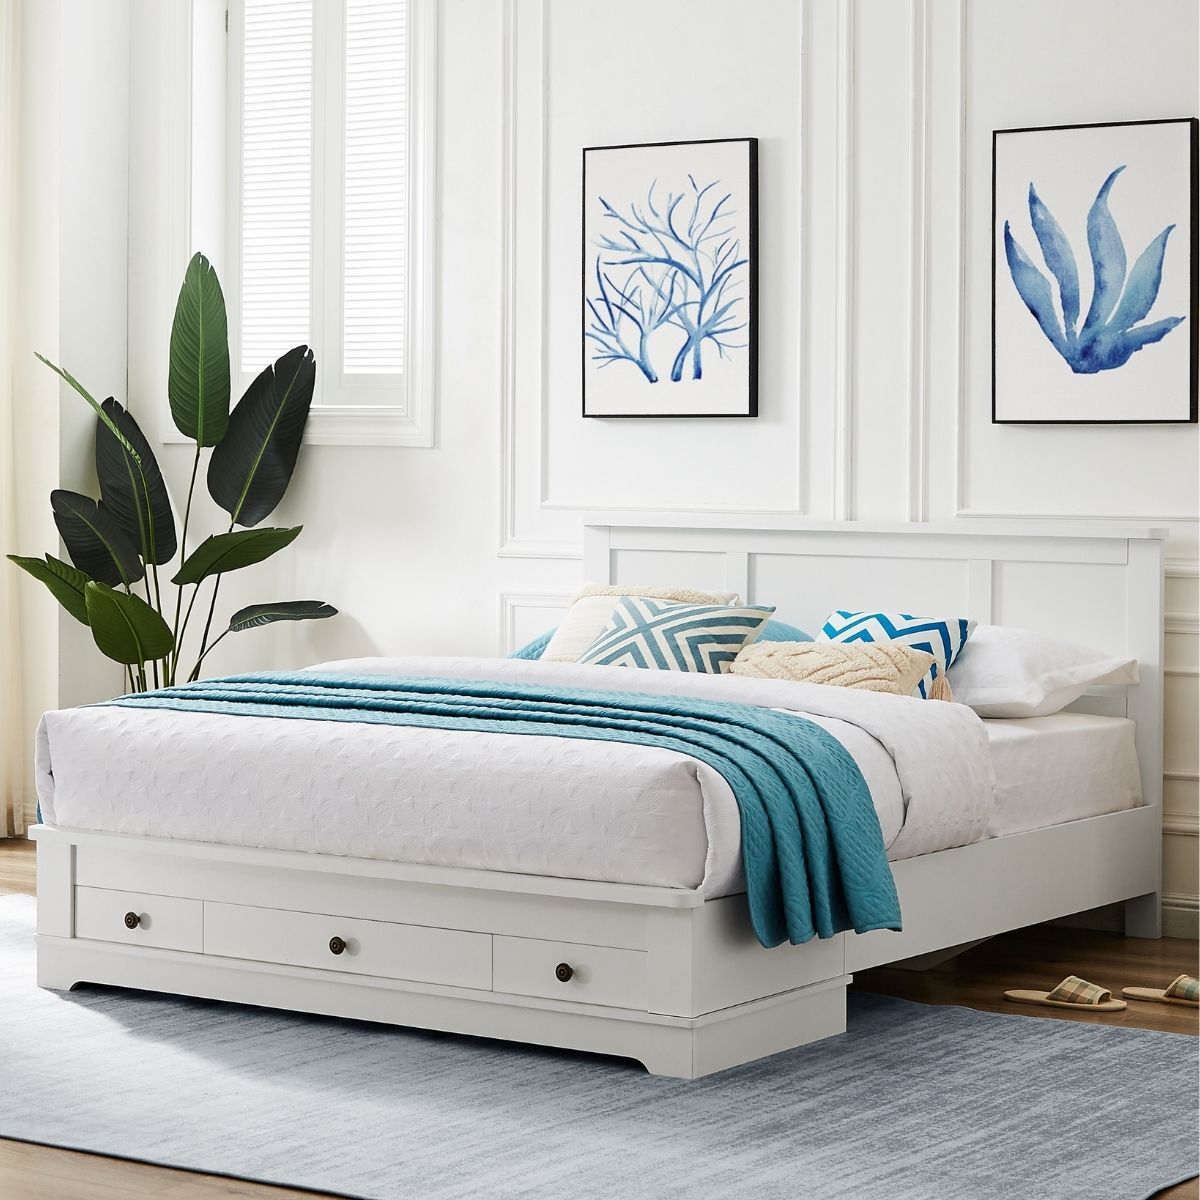 Ebor White Coastal Lifestyle Bedframe with Storage Drawers Queen